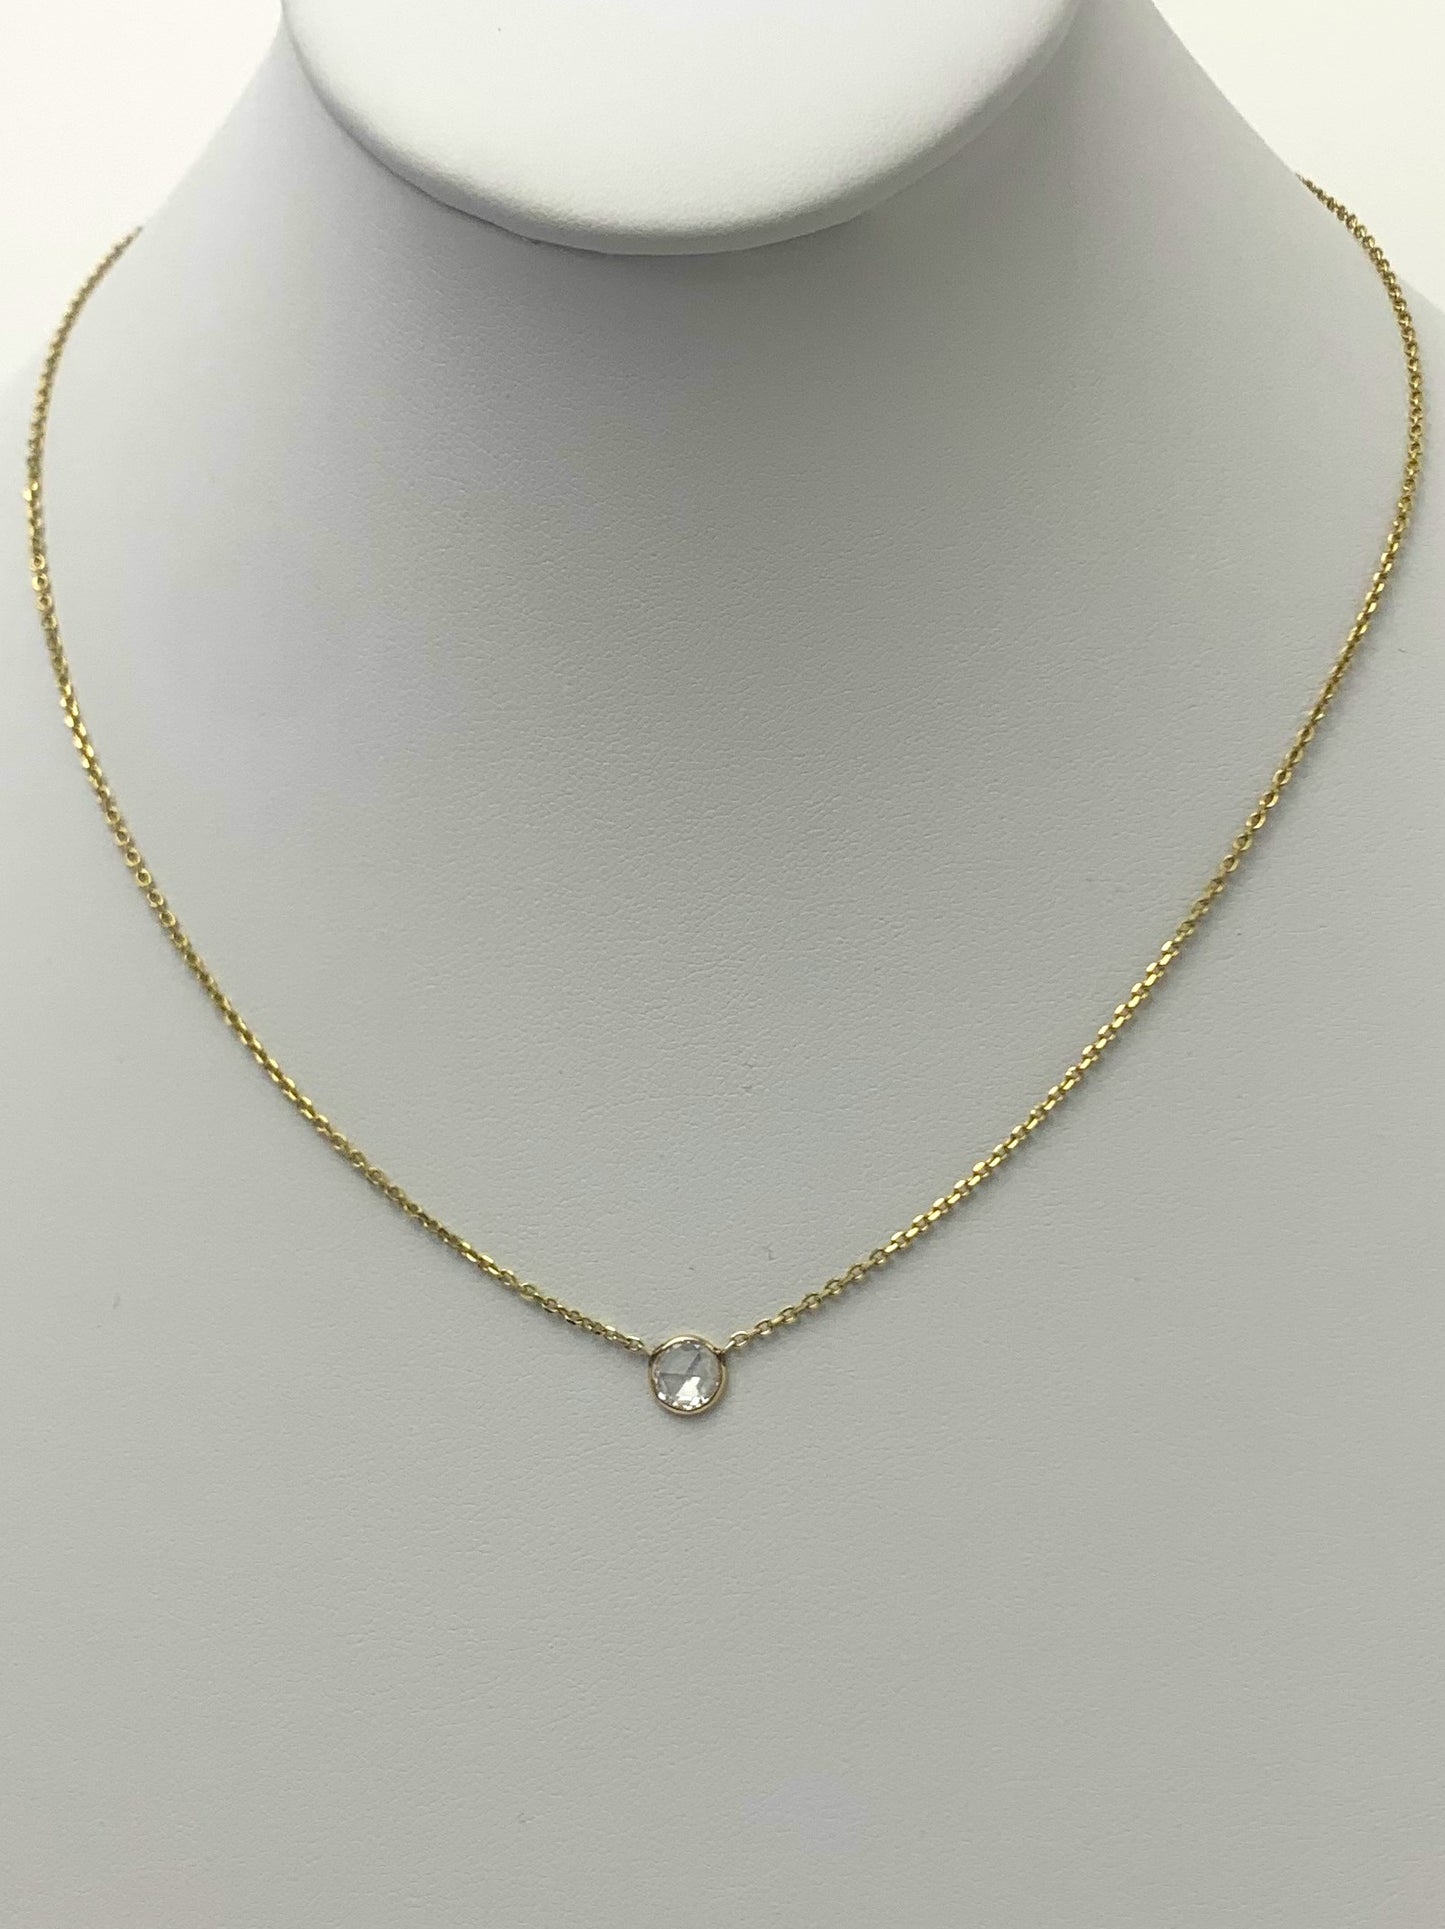 17" - 18" Rose-Cut White Diamond DBY Necklace in 14KY - NCK-048-DBYDIA14Y-WH-17 0.55ctw